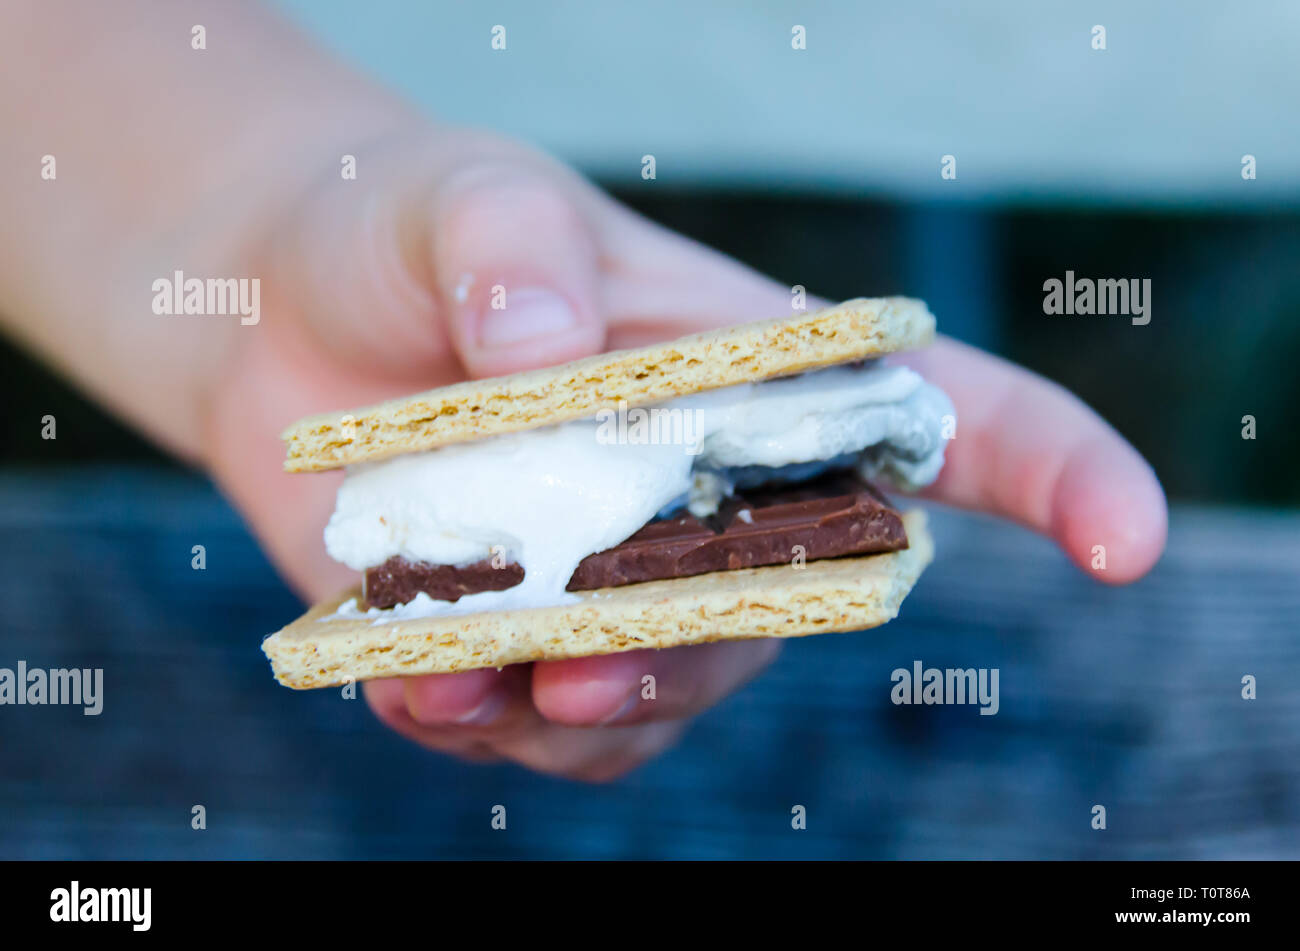 Smore's, a delicious sweet treat with roasted marshmallow, graham cracker and chocolate. Young child's hand holding a smore that was fixed outdoors. Stock Photo